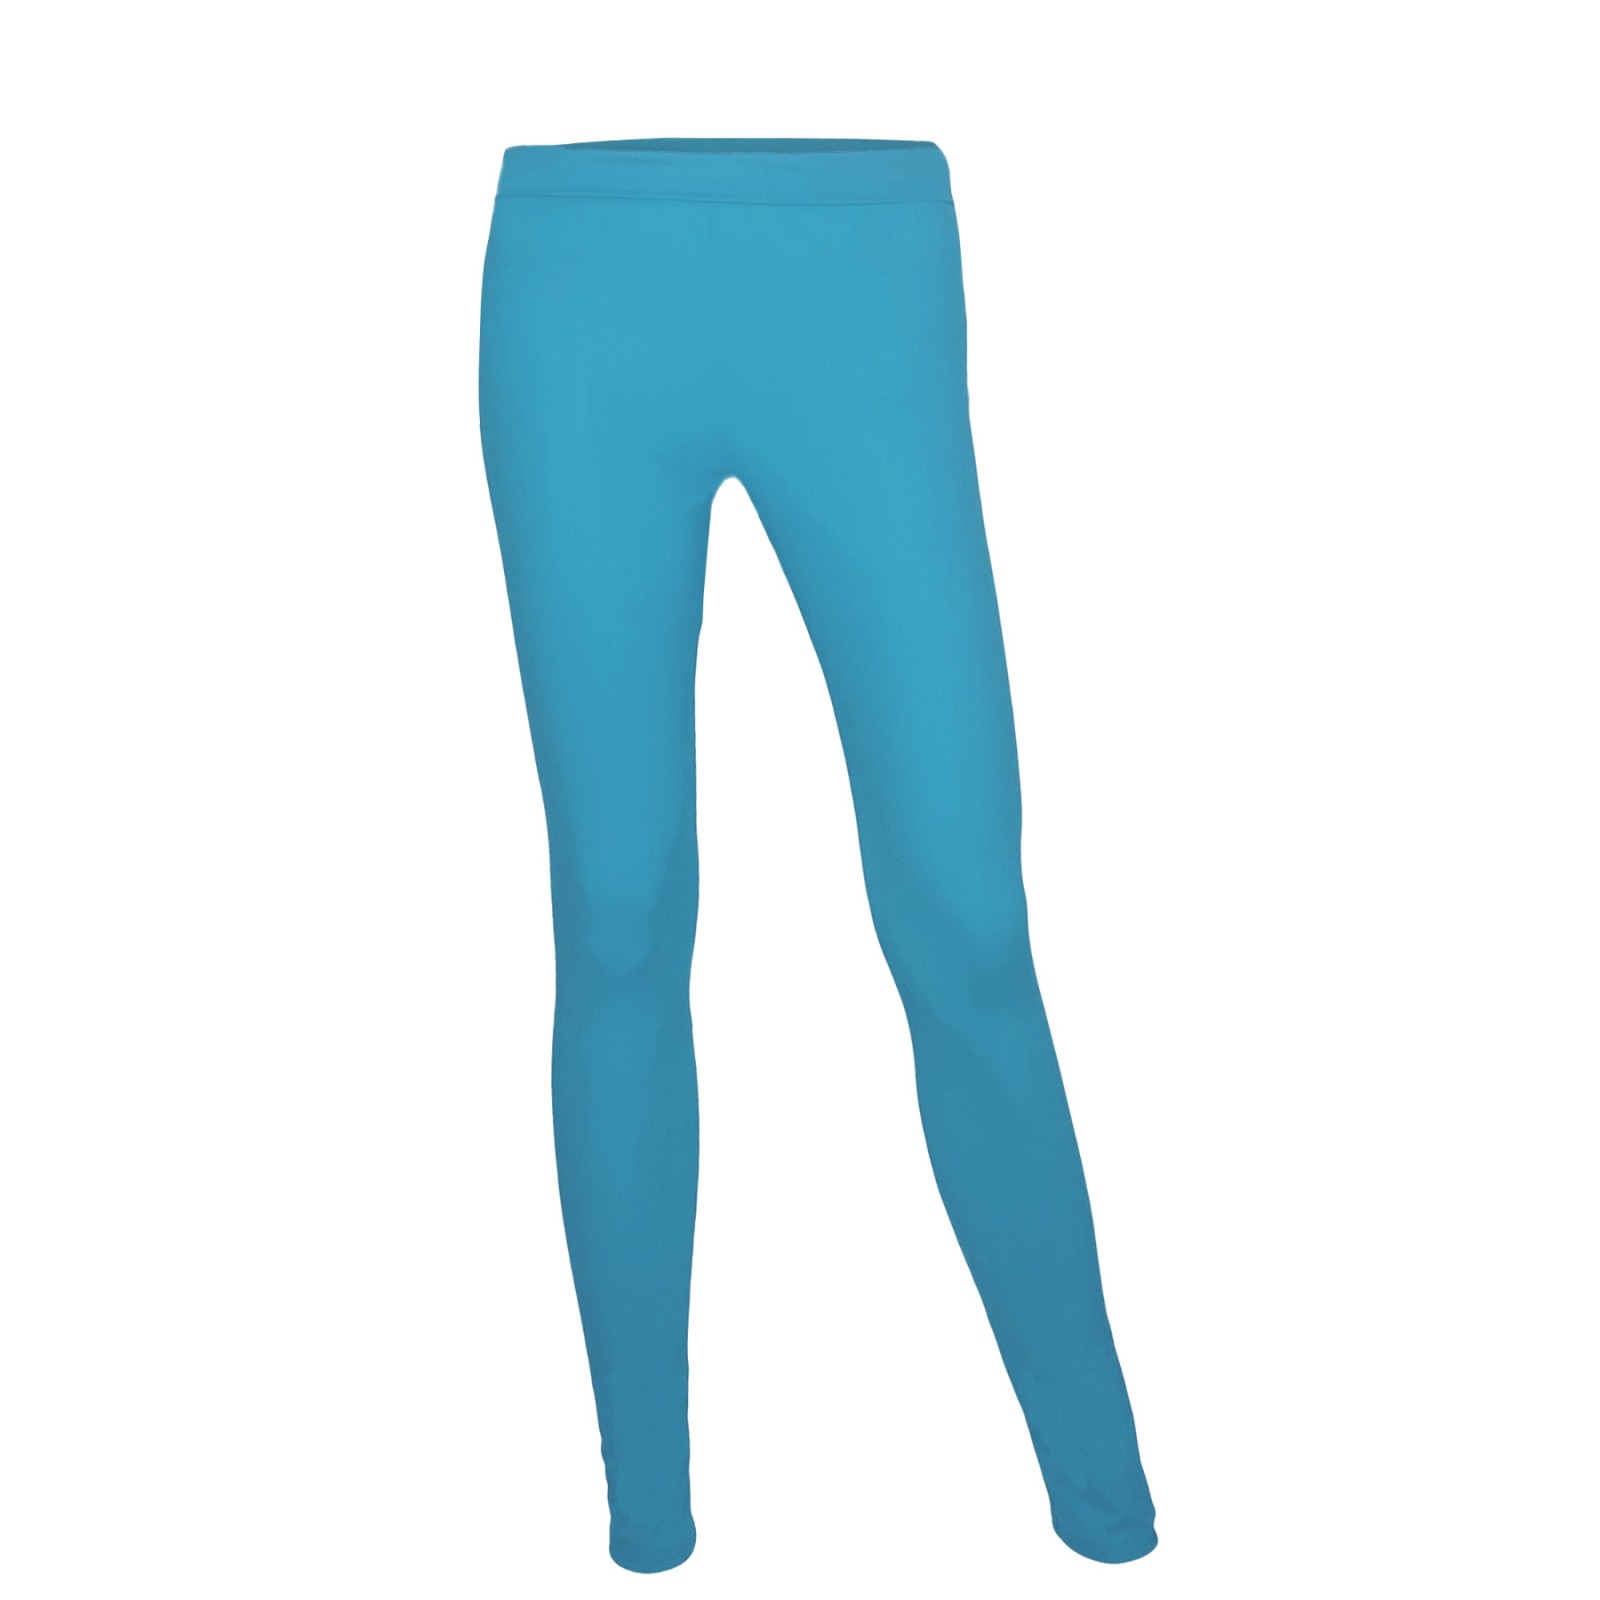 Recycling leggings Forma sailorblue blue